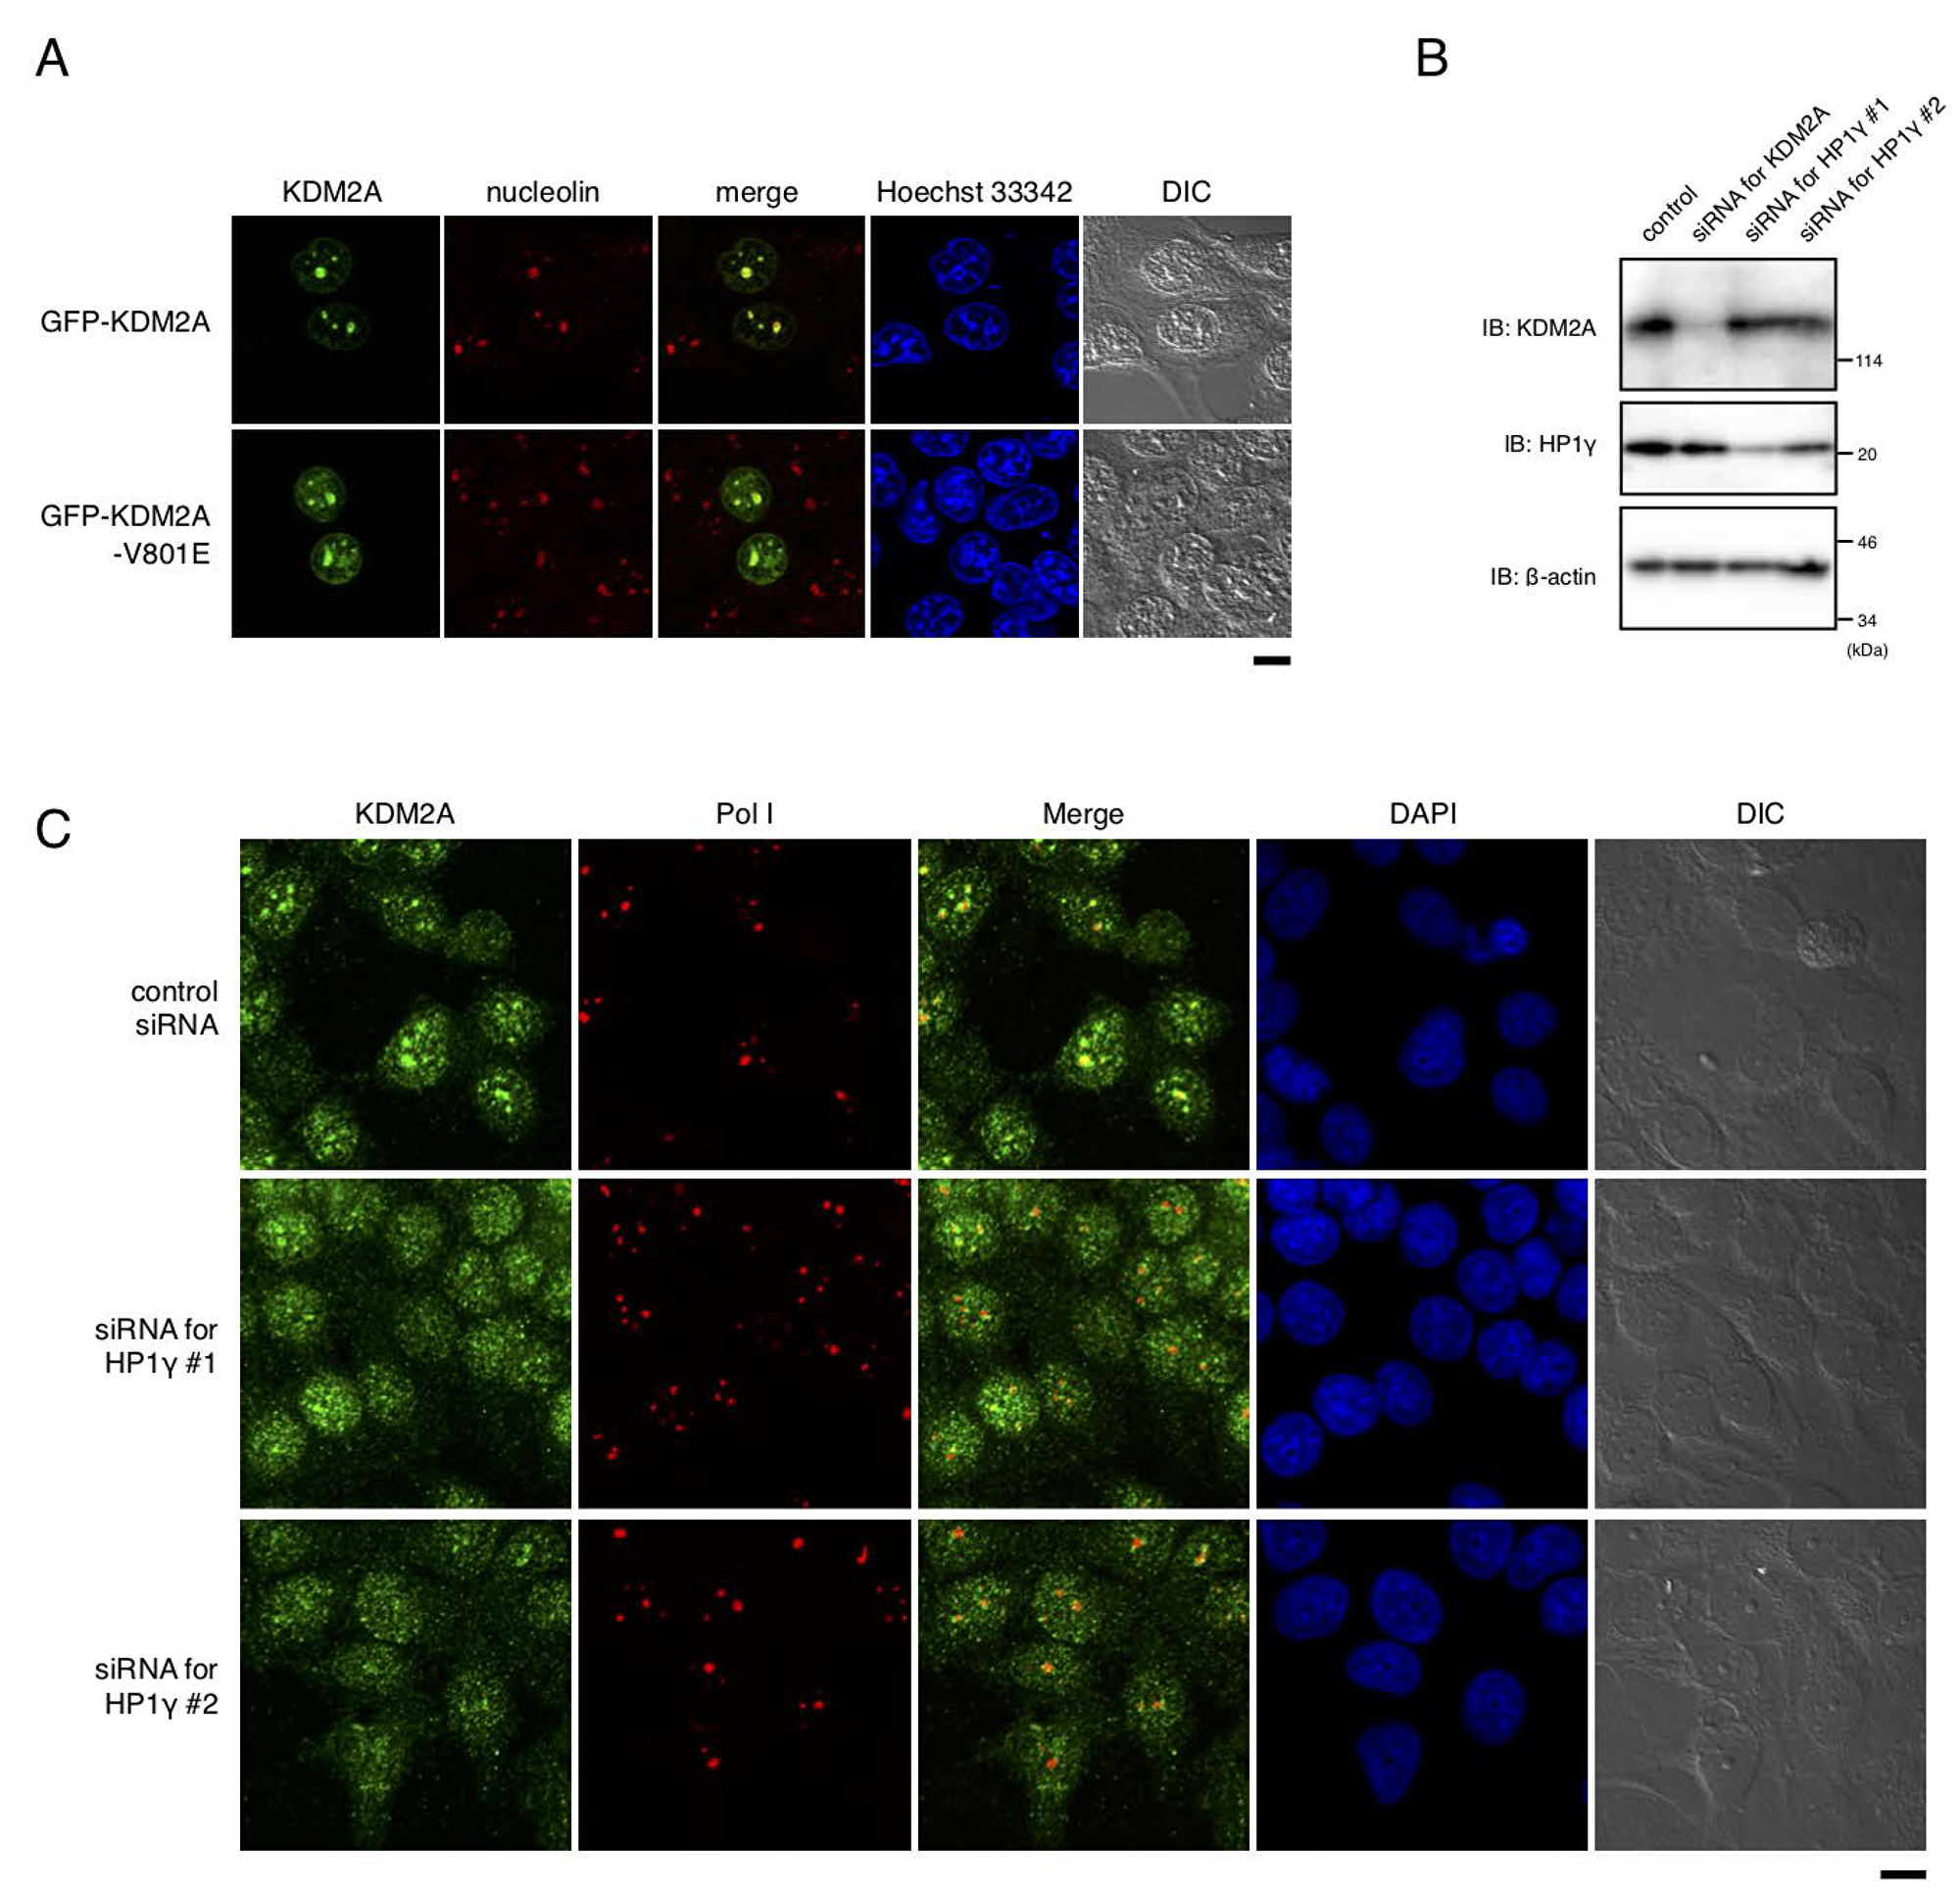 HP1γ is involved in nucleolar accumulation and binding to rDNA promoter of KDM2A.